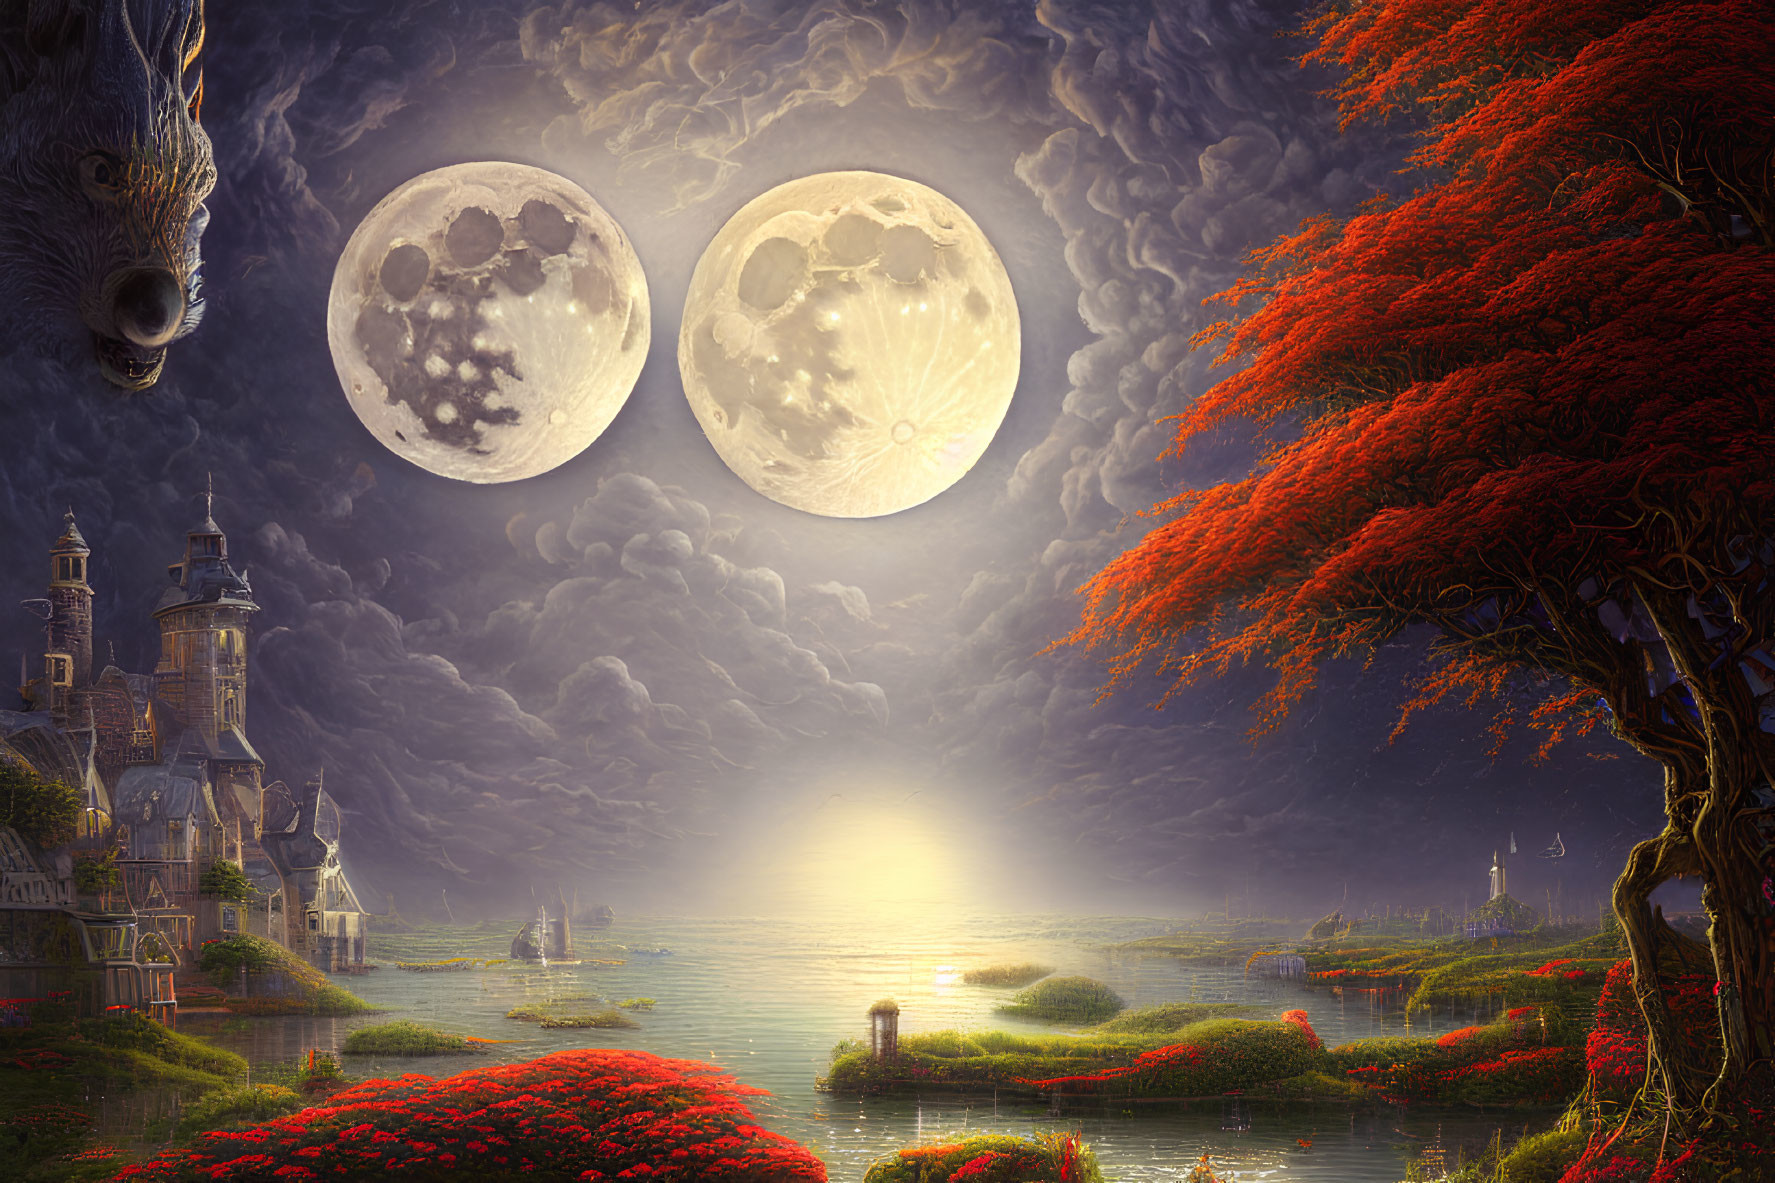 Fantasy landscape with castle, two moons, bear-like creature, red foliage, and sunlit water